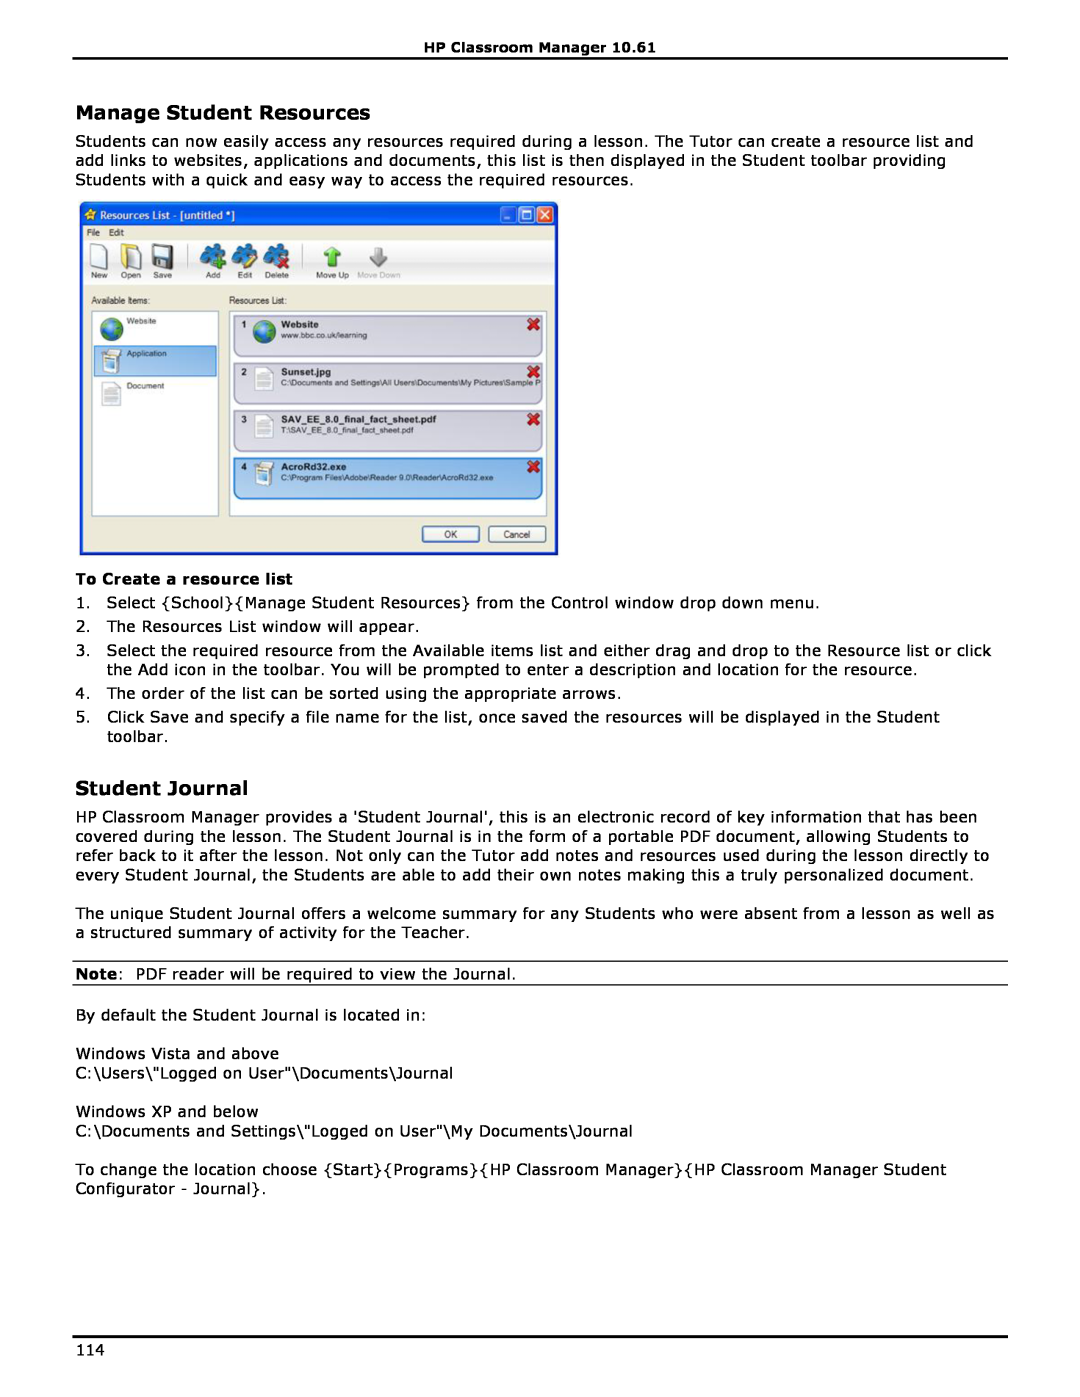 HP Classroom Manager manual Manage Student Resources, Student Journal, To Create a resource list 